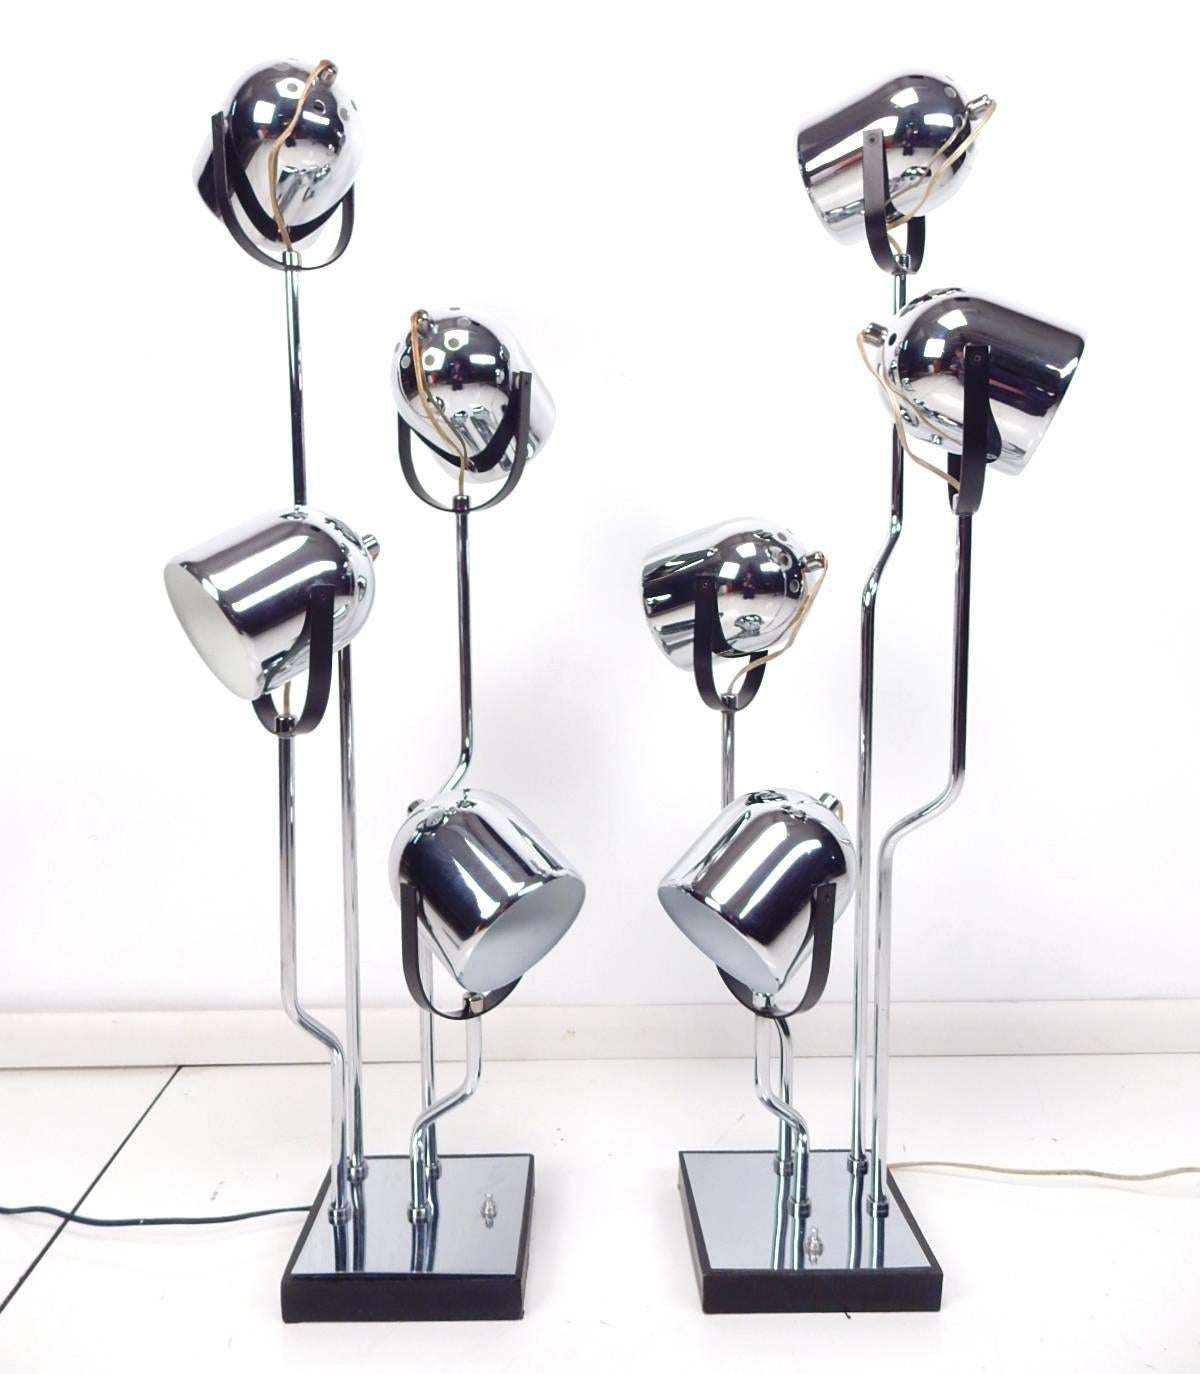 Pair of 1970s four level spotlight lamps by Clover Lamp CO. in style of Goffredo Reggiani of Italy.
Three-way switch on base. Shades adjust in every direction. Heavy well constructed and quality lamps.
 